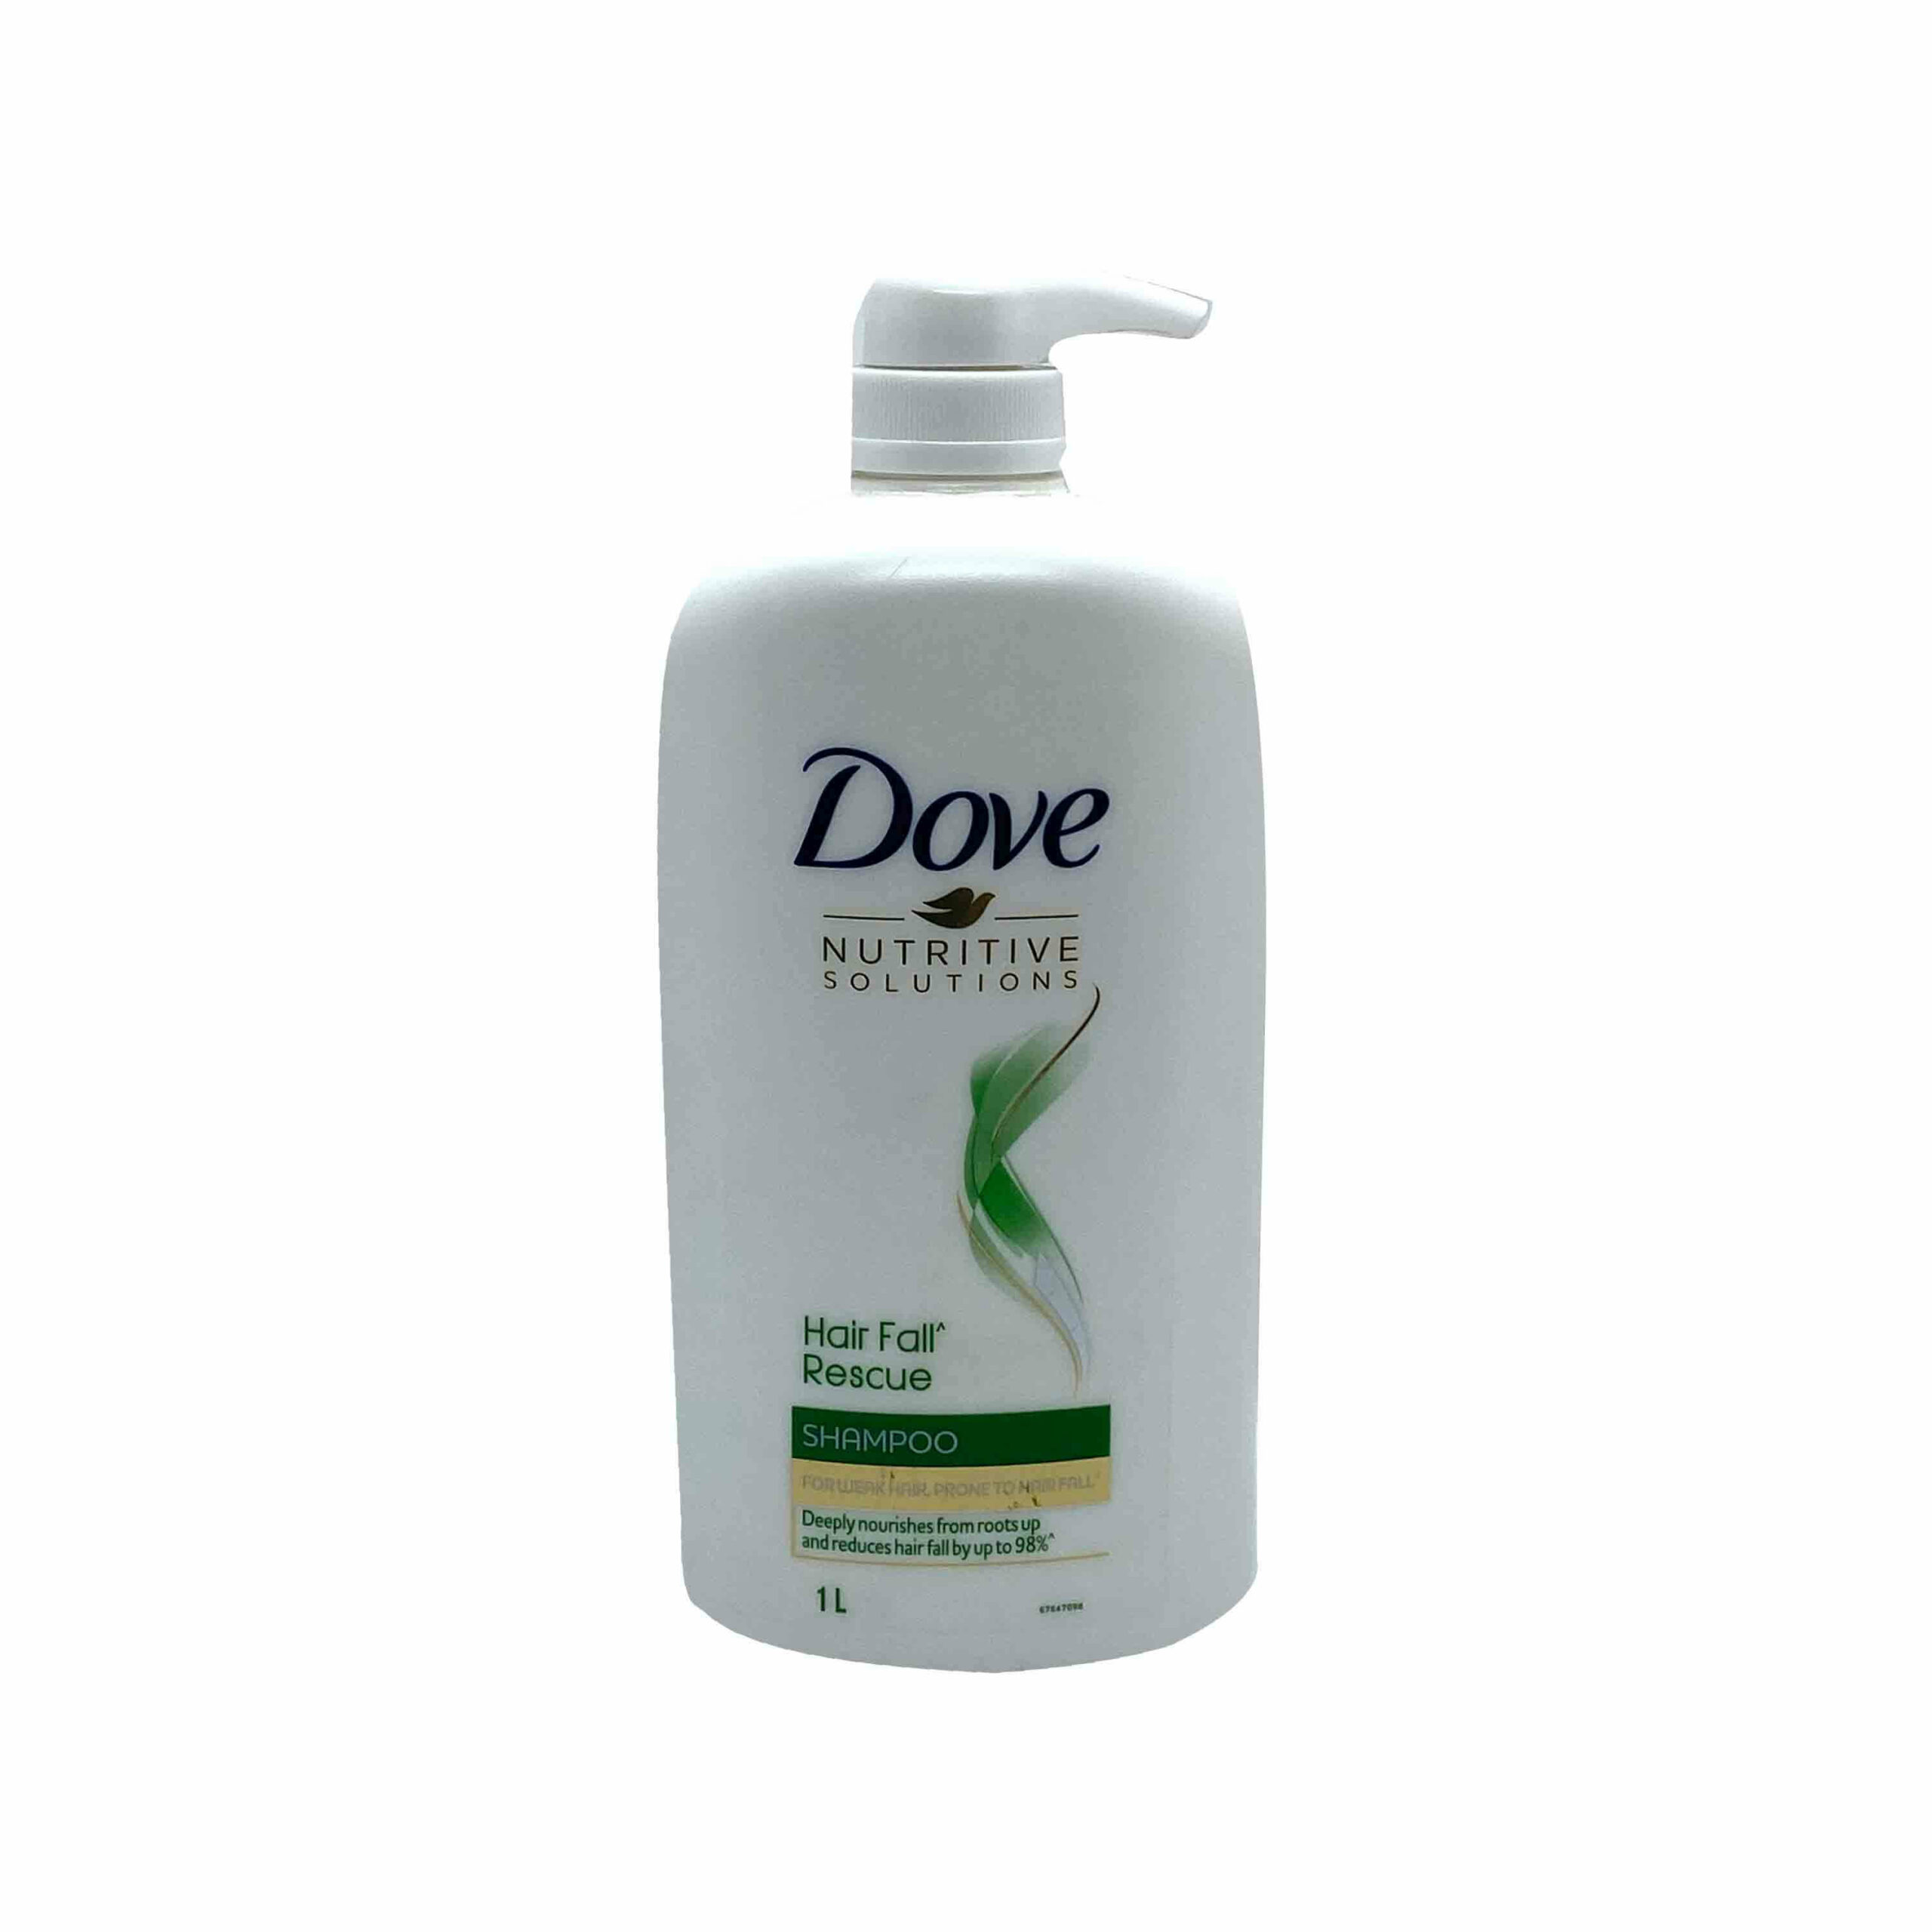 Dove Nutritive Solutions Hair Fall Rescue Shampoo 1ltr | Sammed